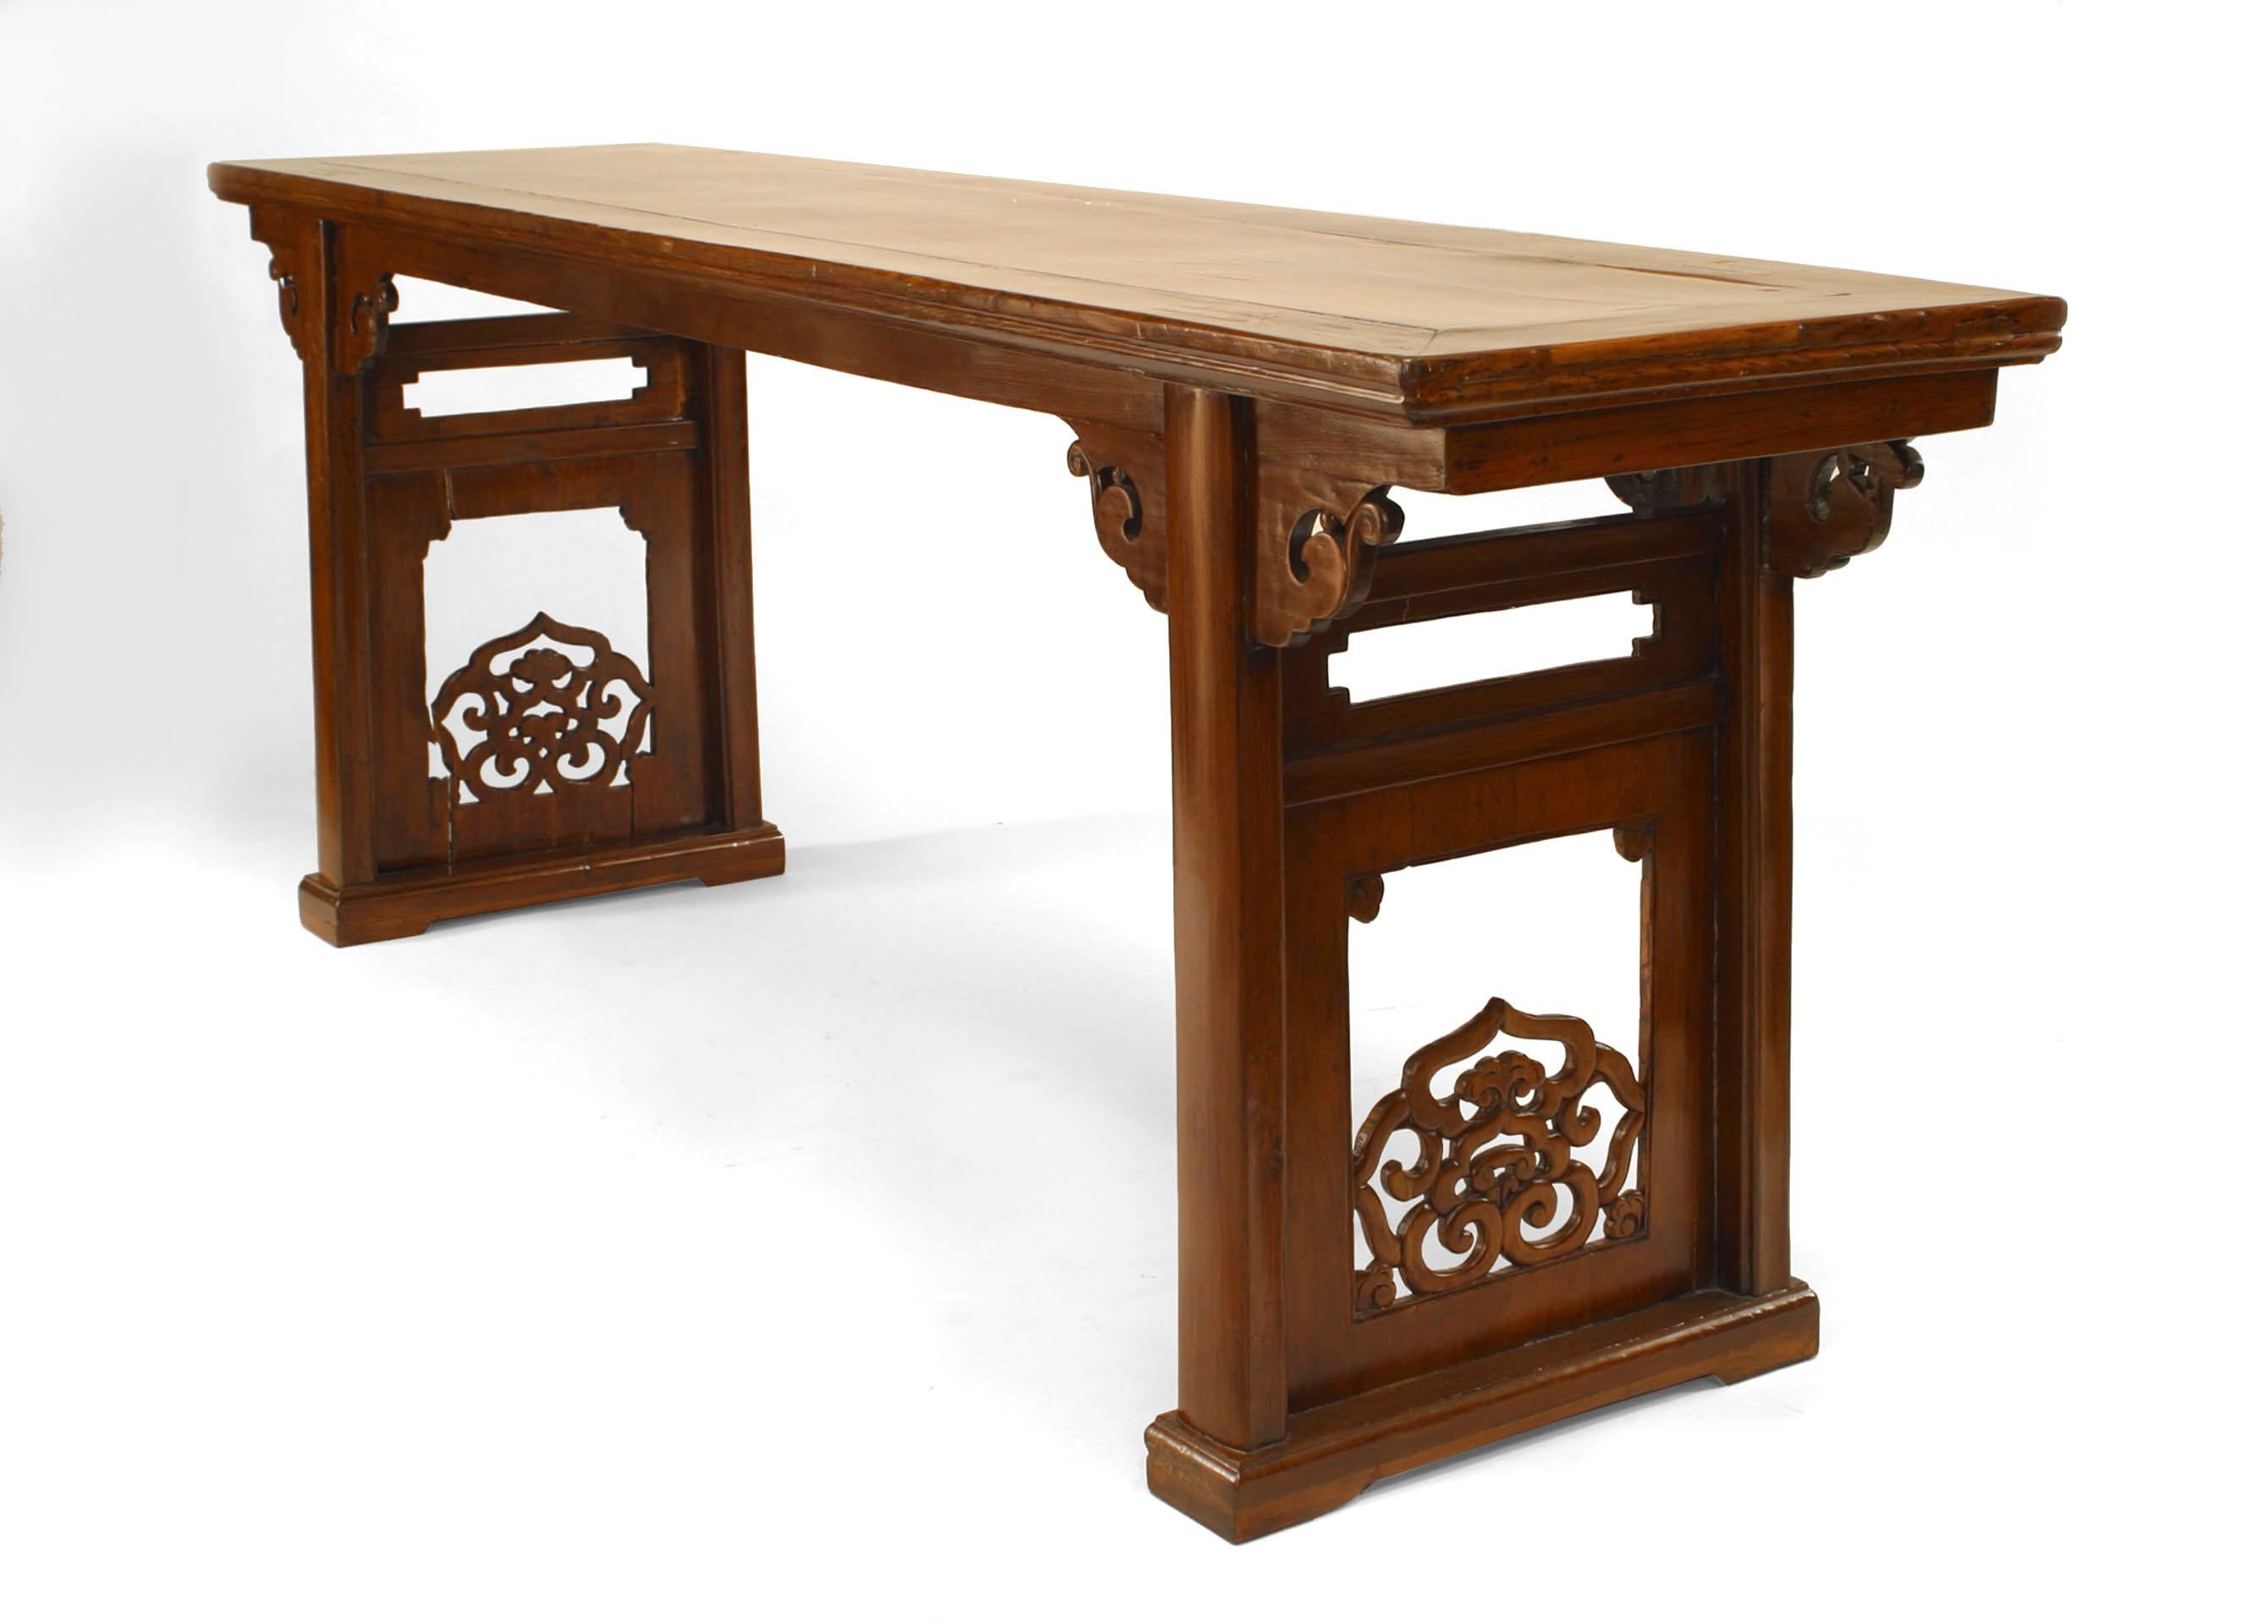 Chinese (19th Century) elmwood (yu-mu) large console table with carved cloud form scrolls between the legs on the apron and filigree carving with a stretcher on the sides.
